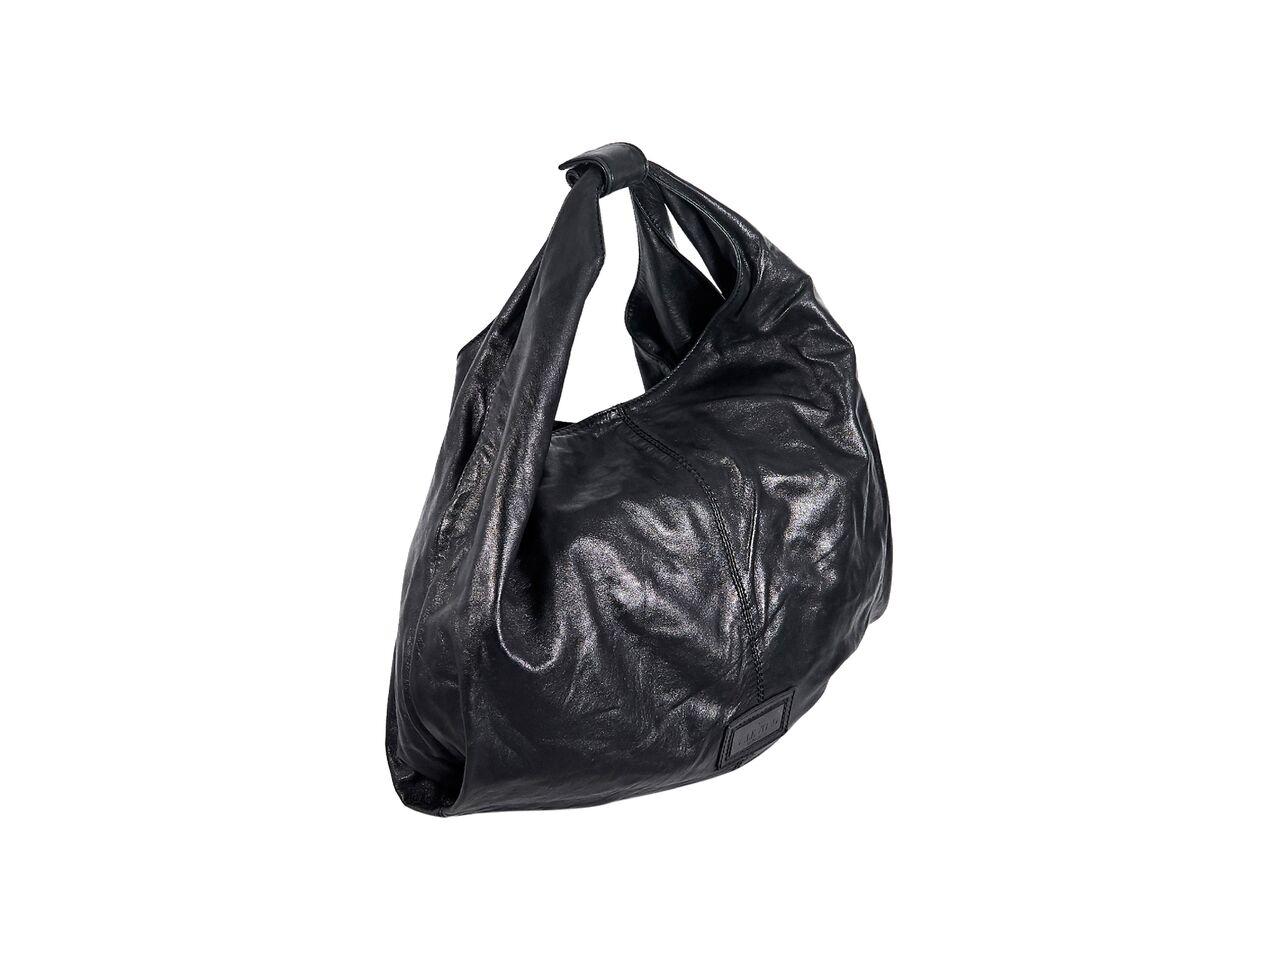 Product details:  Black leather hobo bag by Valentino.  Accented with oversized floral applique at front.  Single shoulder strap.  Concealed magnetic snap closure.  Lined interior with inner zip and slide pockets.  19